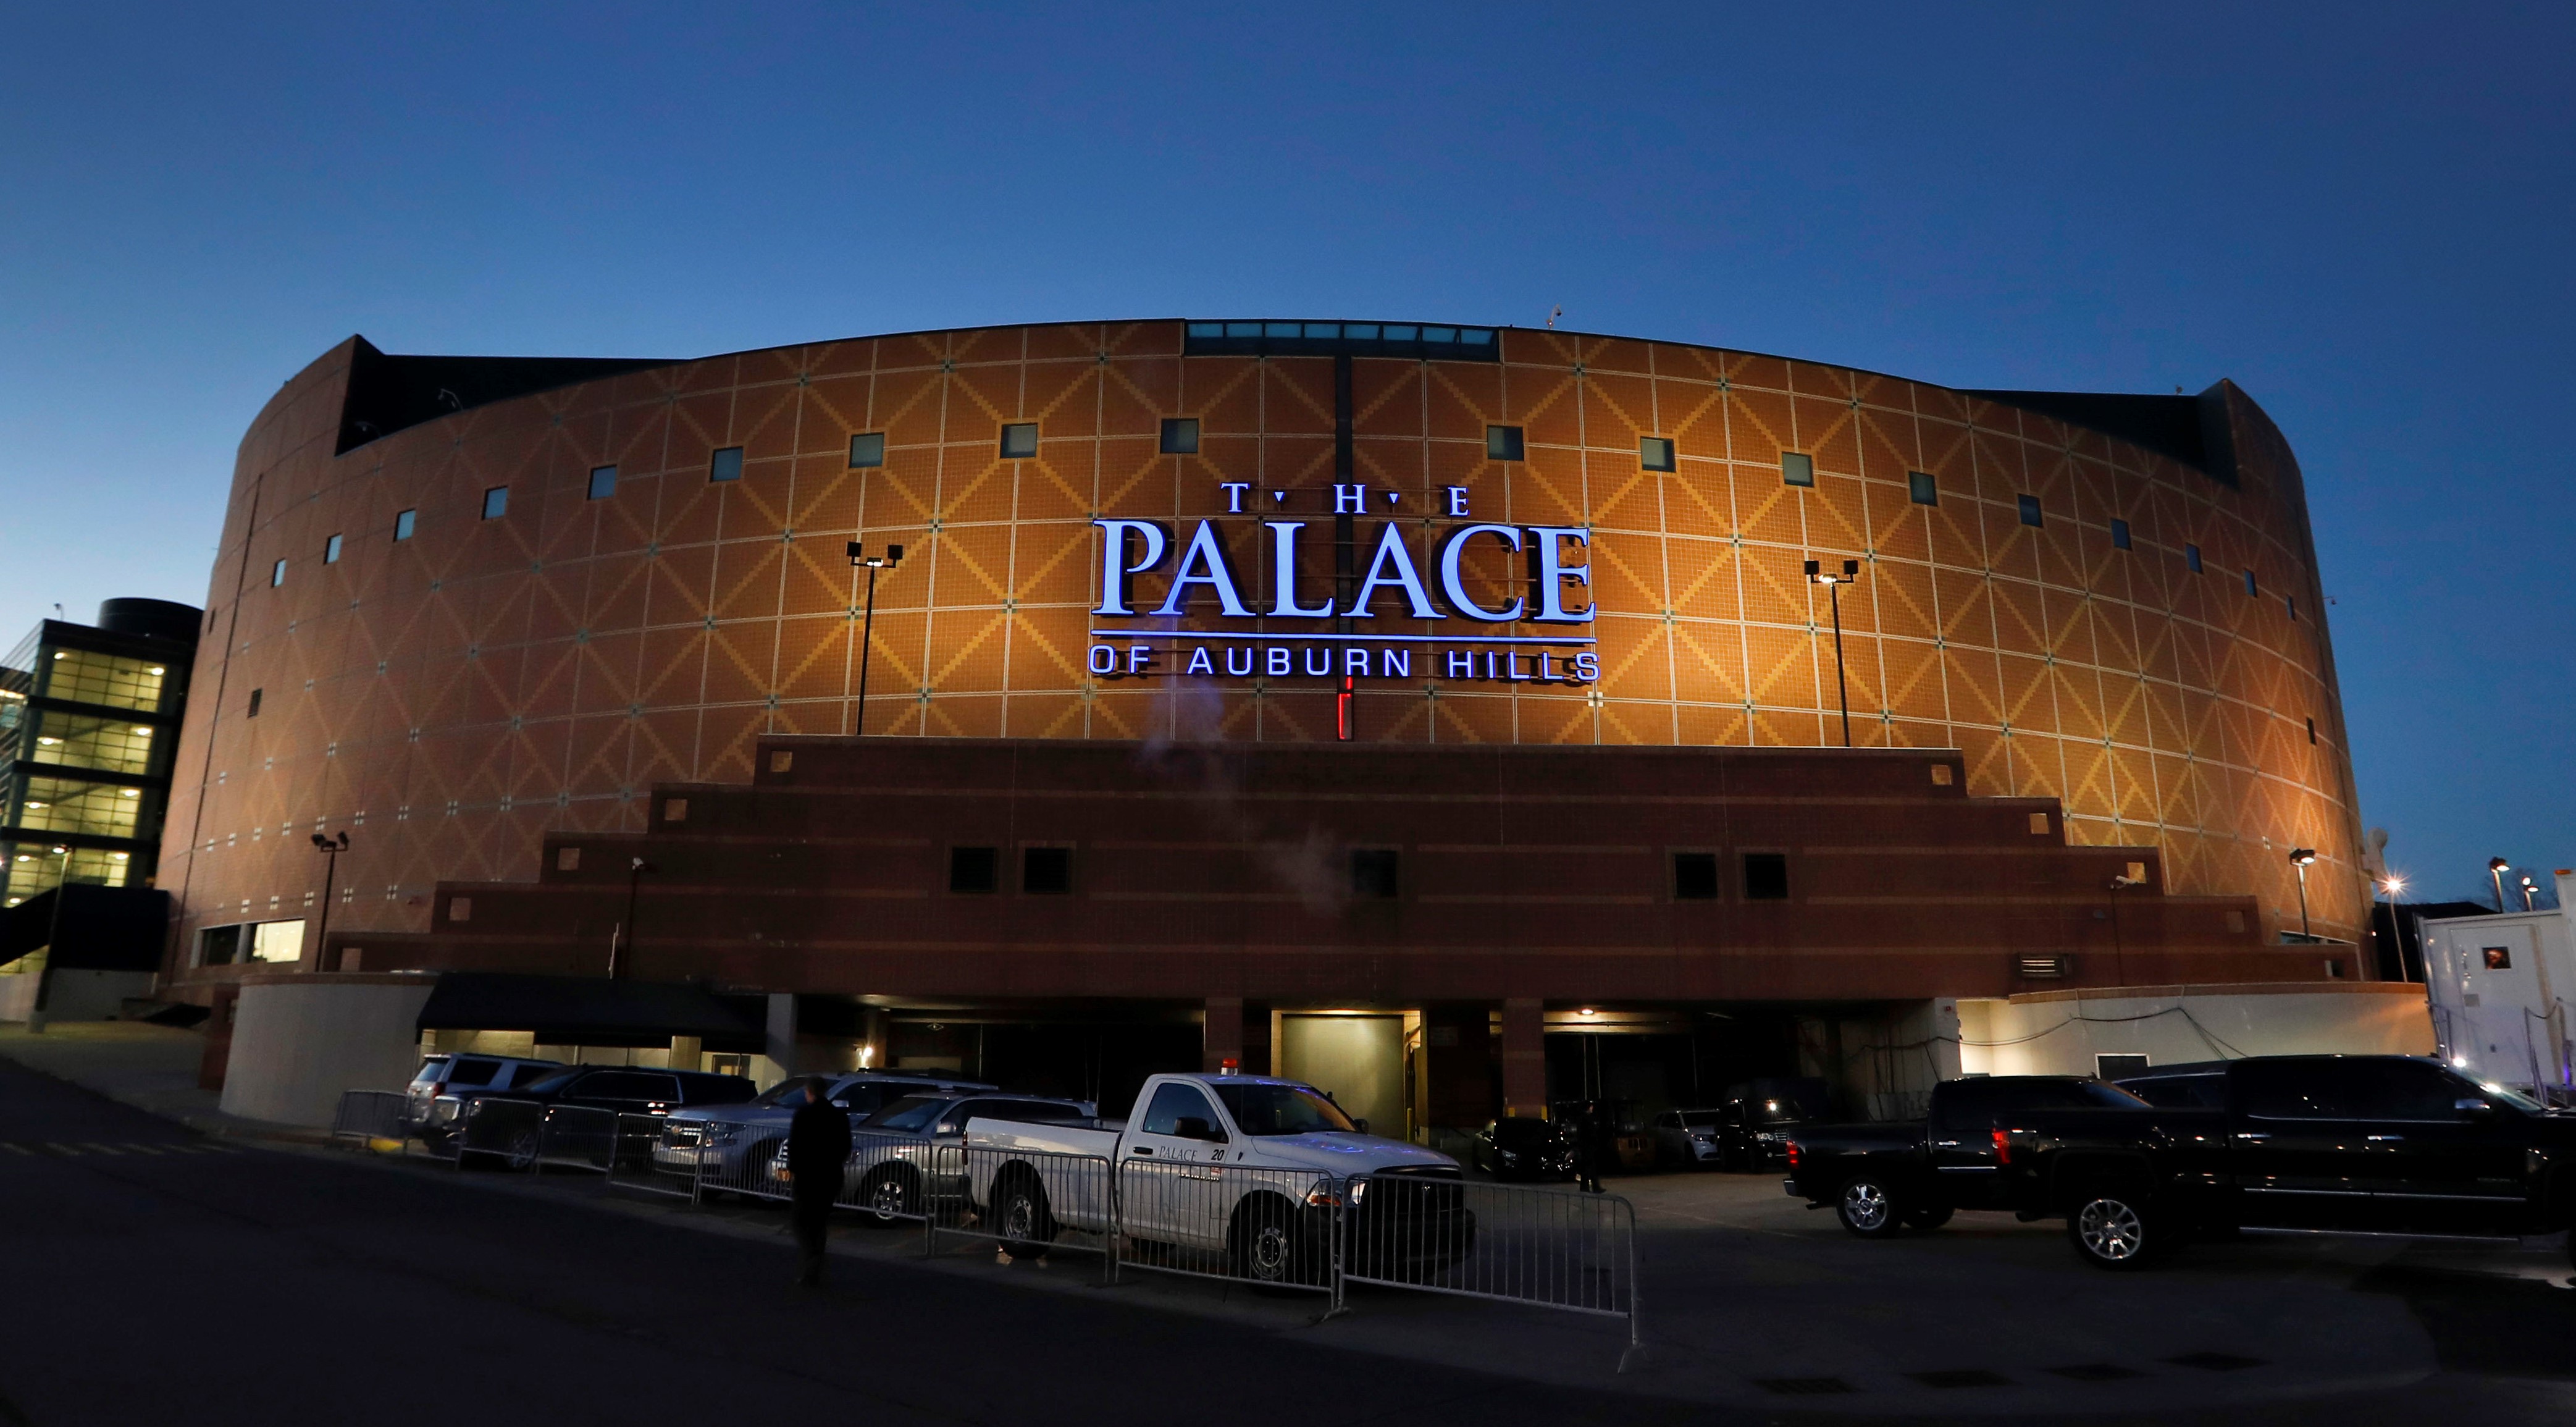 Detroit Pistons: Memories of The Palace of Auburn Hills - Page 3